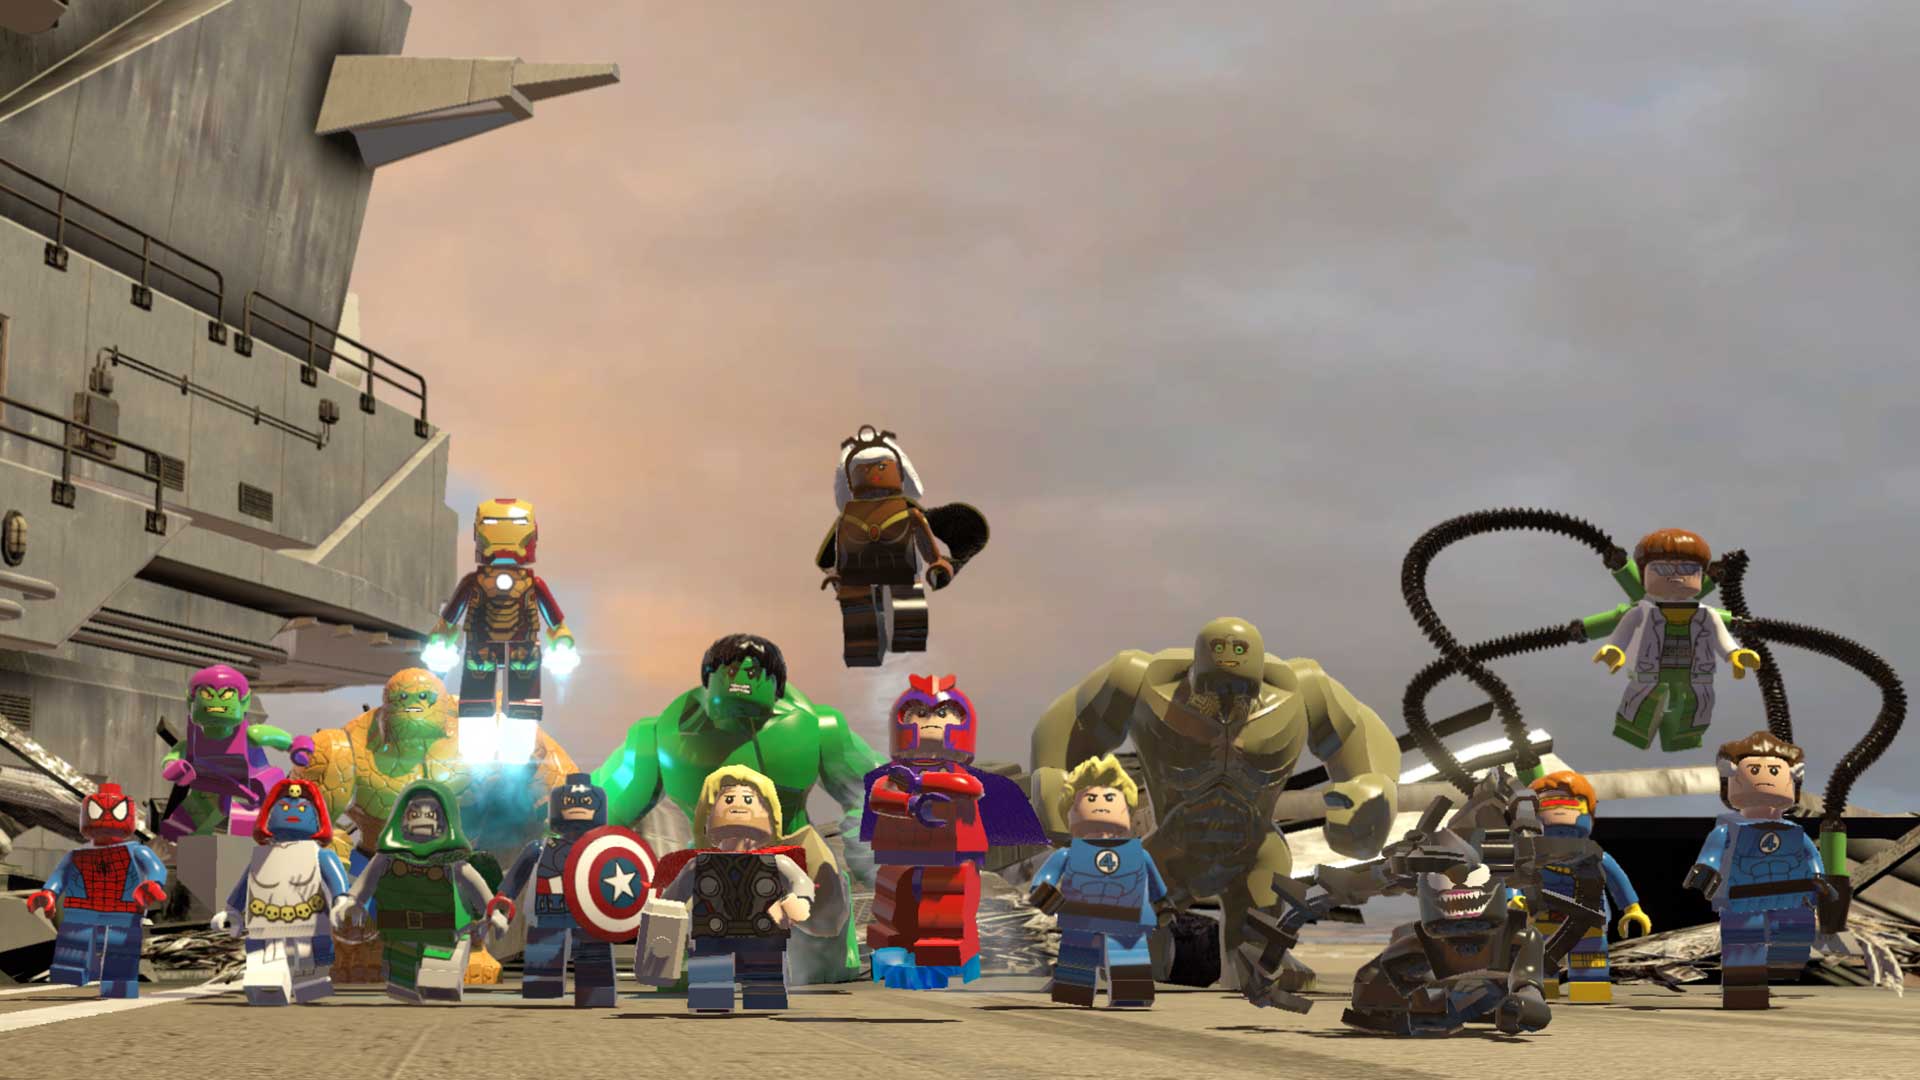 Lego Marvel Collection - PlayStation 4